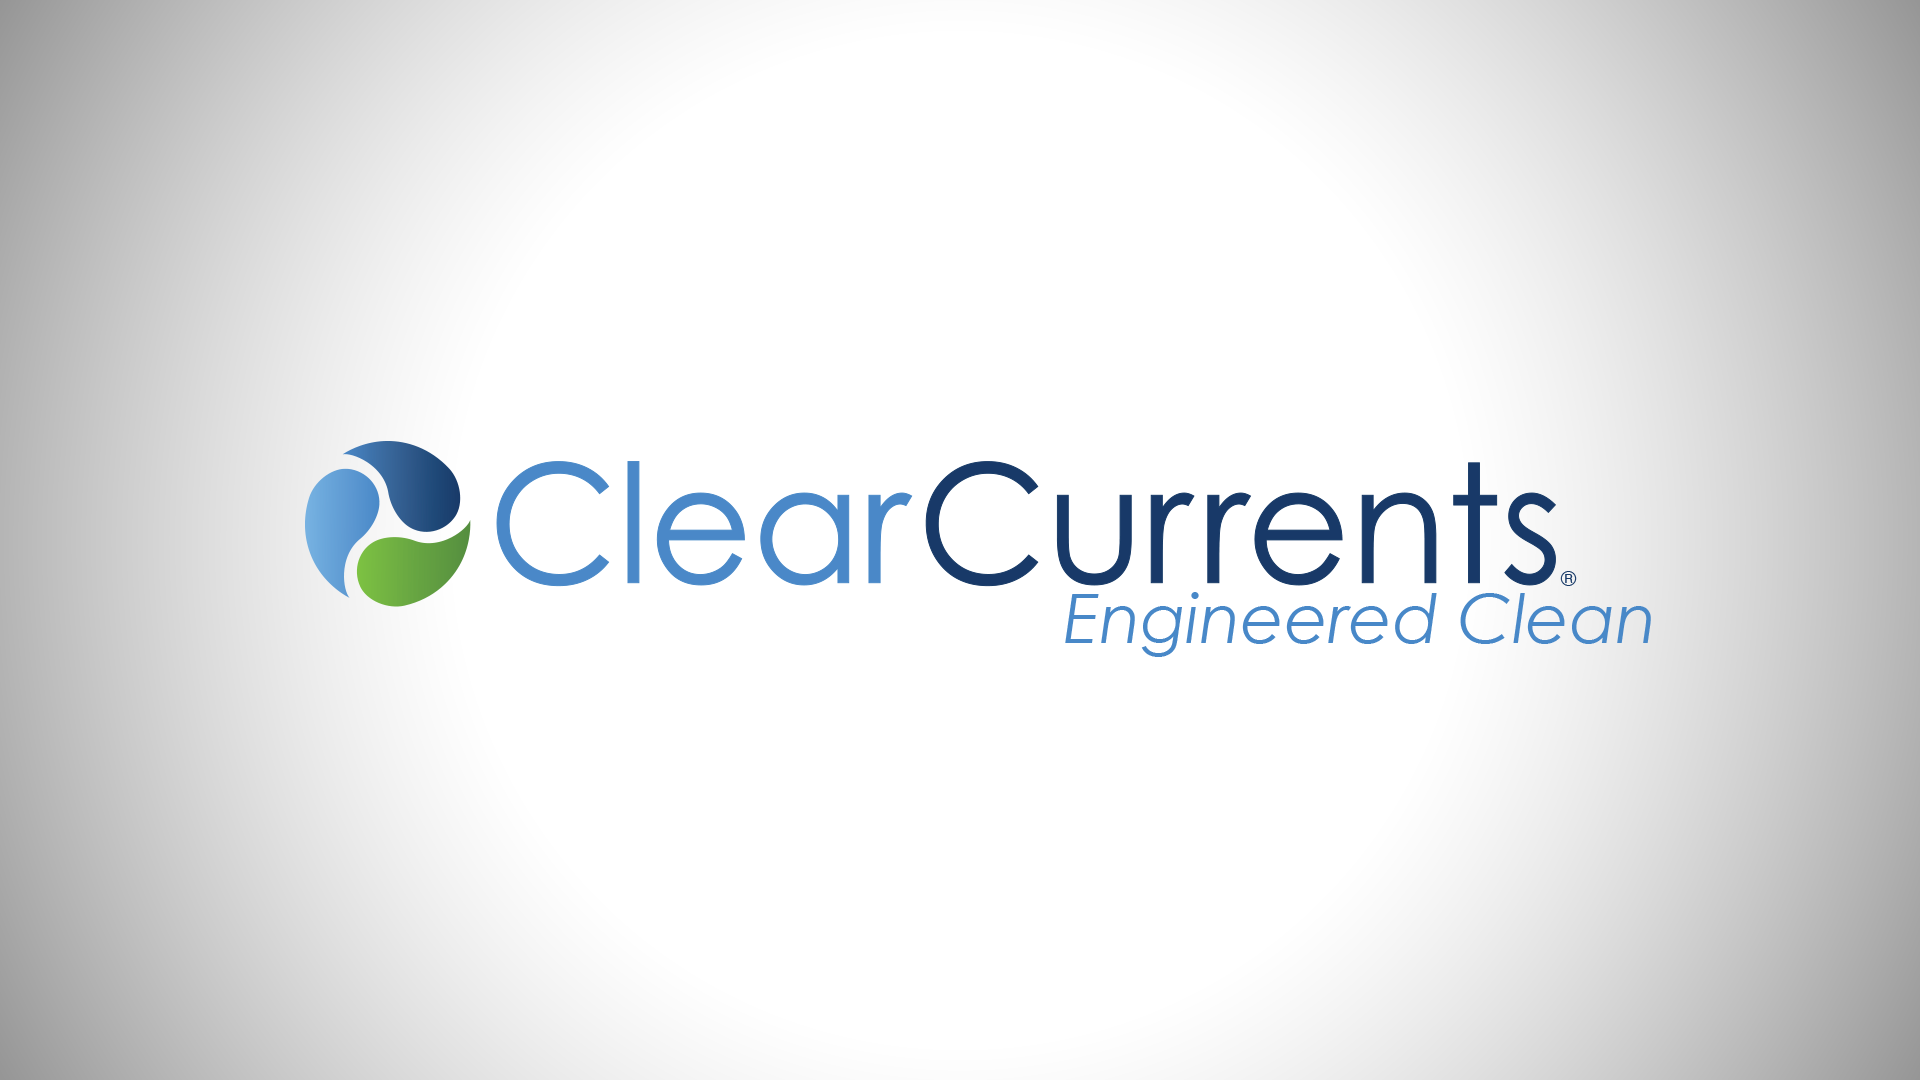 Logo-Clear-Currents1